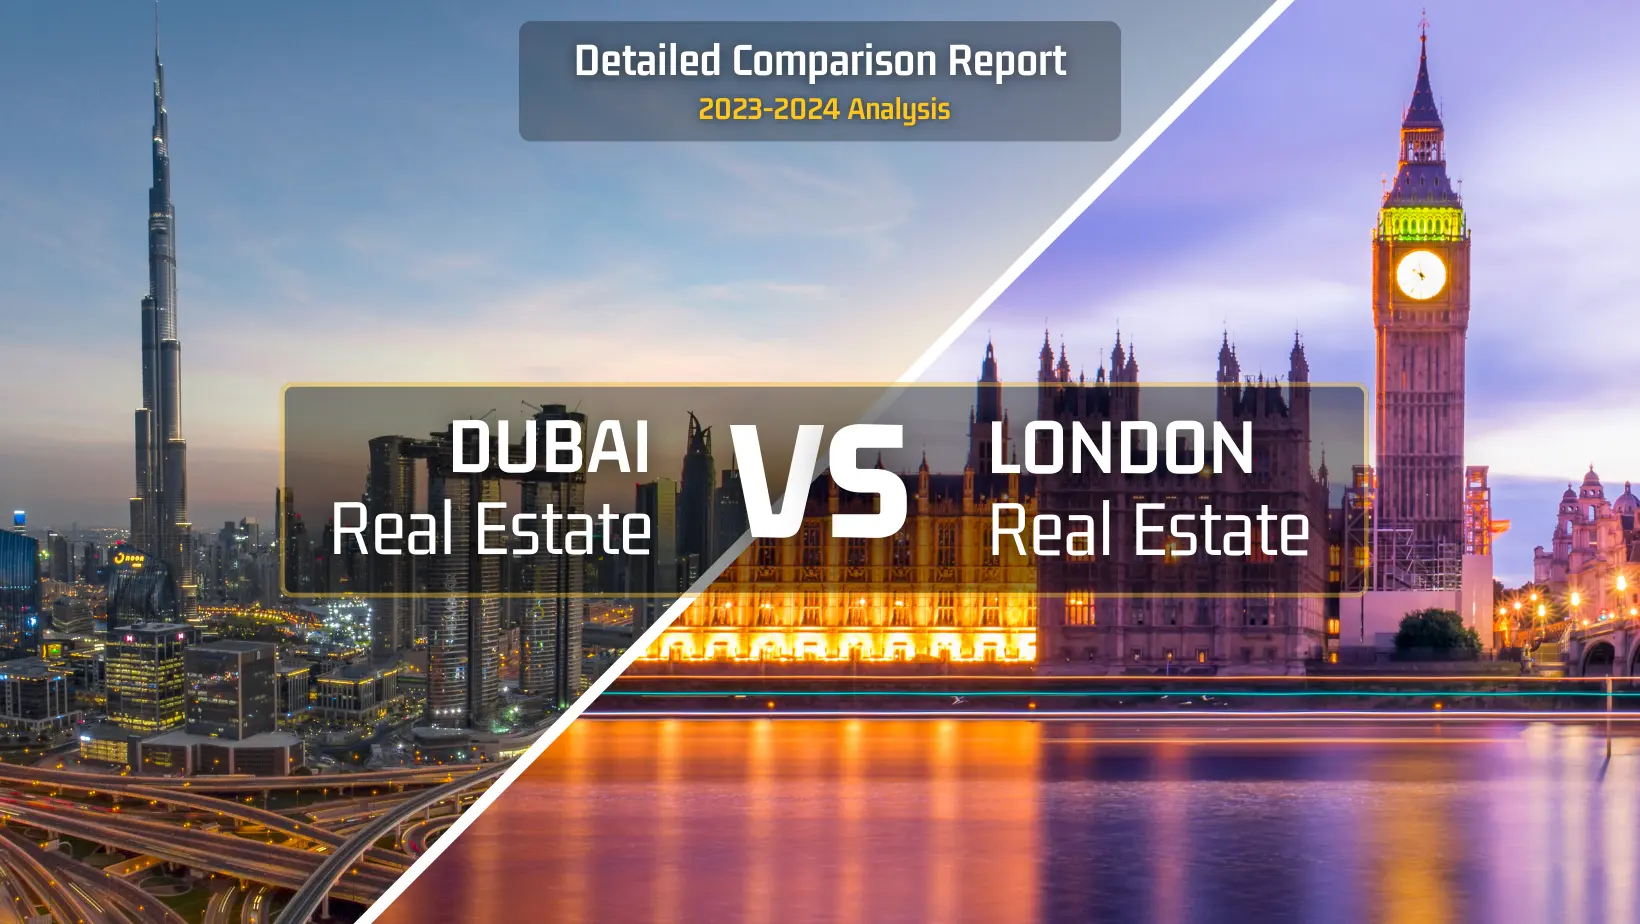 Dubai Vs London - Which is better in terms of property investment?